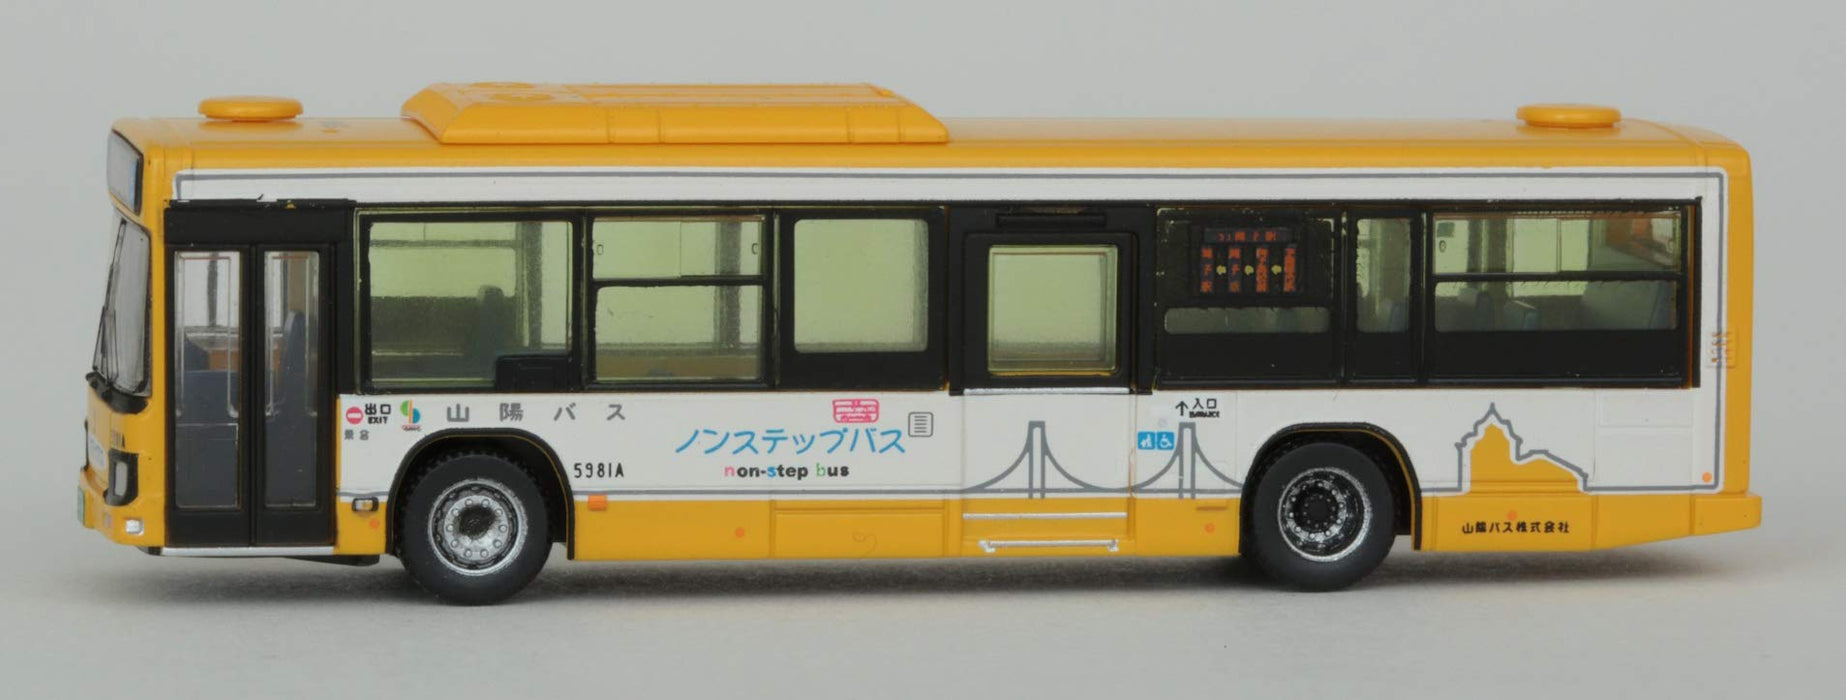 Tomytec National Bus Collection Jb074 Sanyo Bus Diorama Limited First Edition